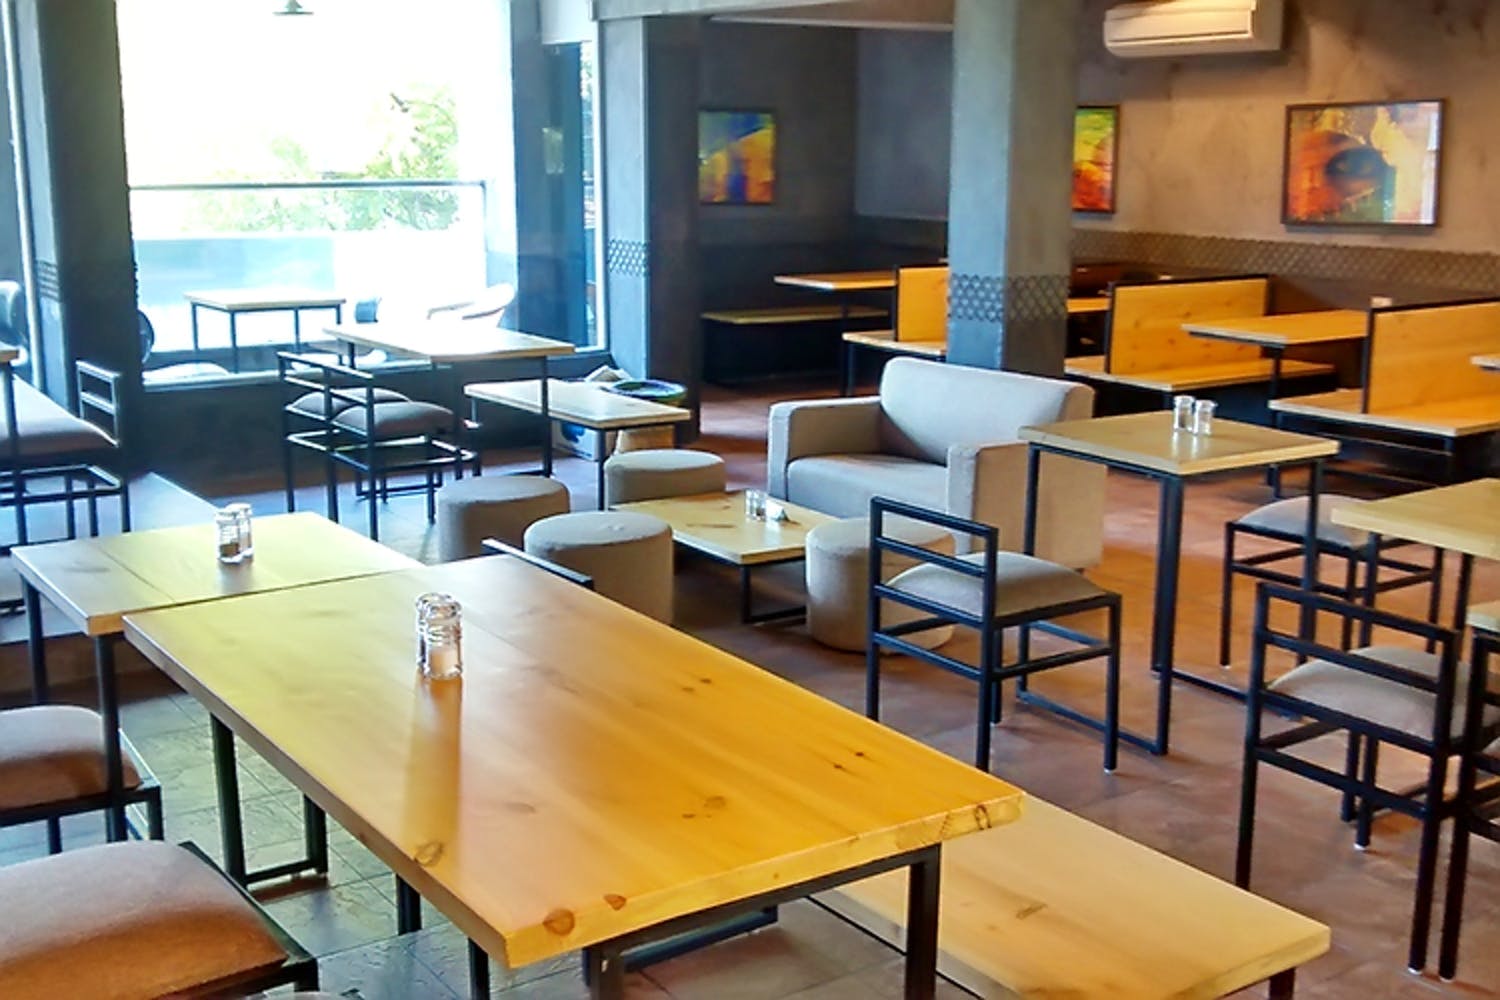 Room,Restaurant,Table,Classroom,Furniture,Cafeteria,Dining room,Building,Interior design,Chair